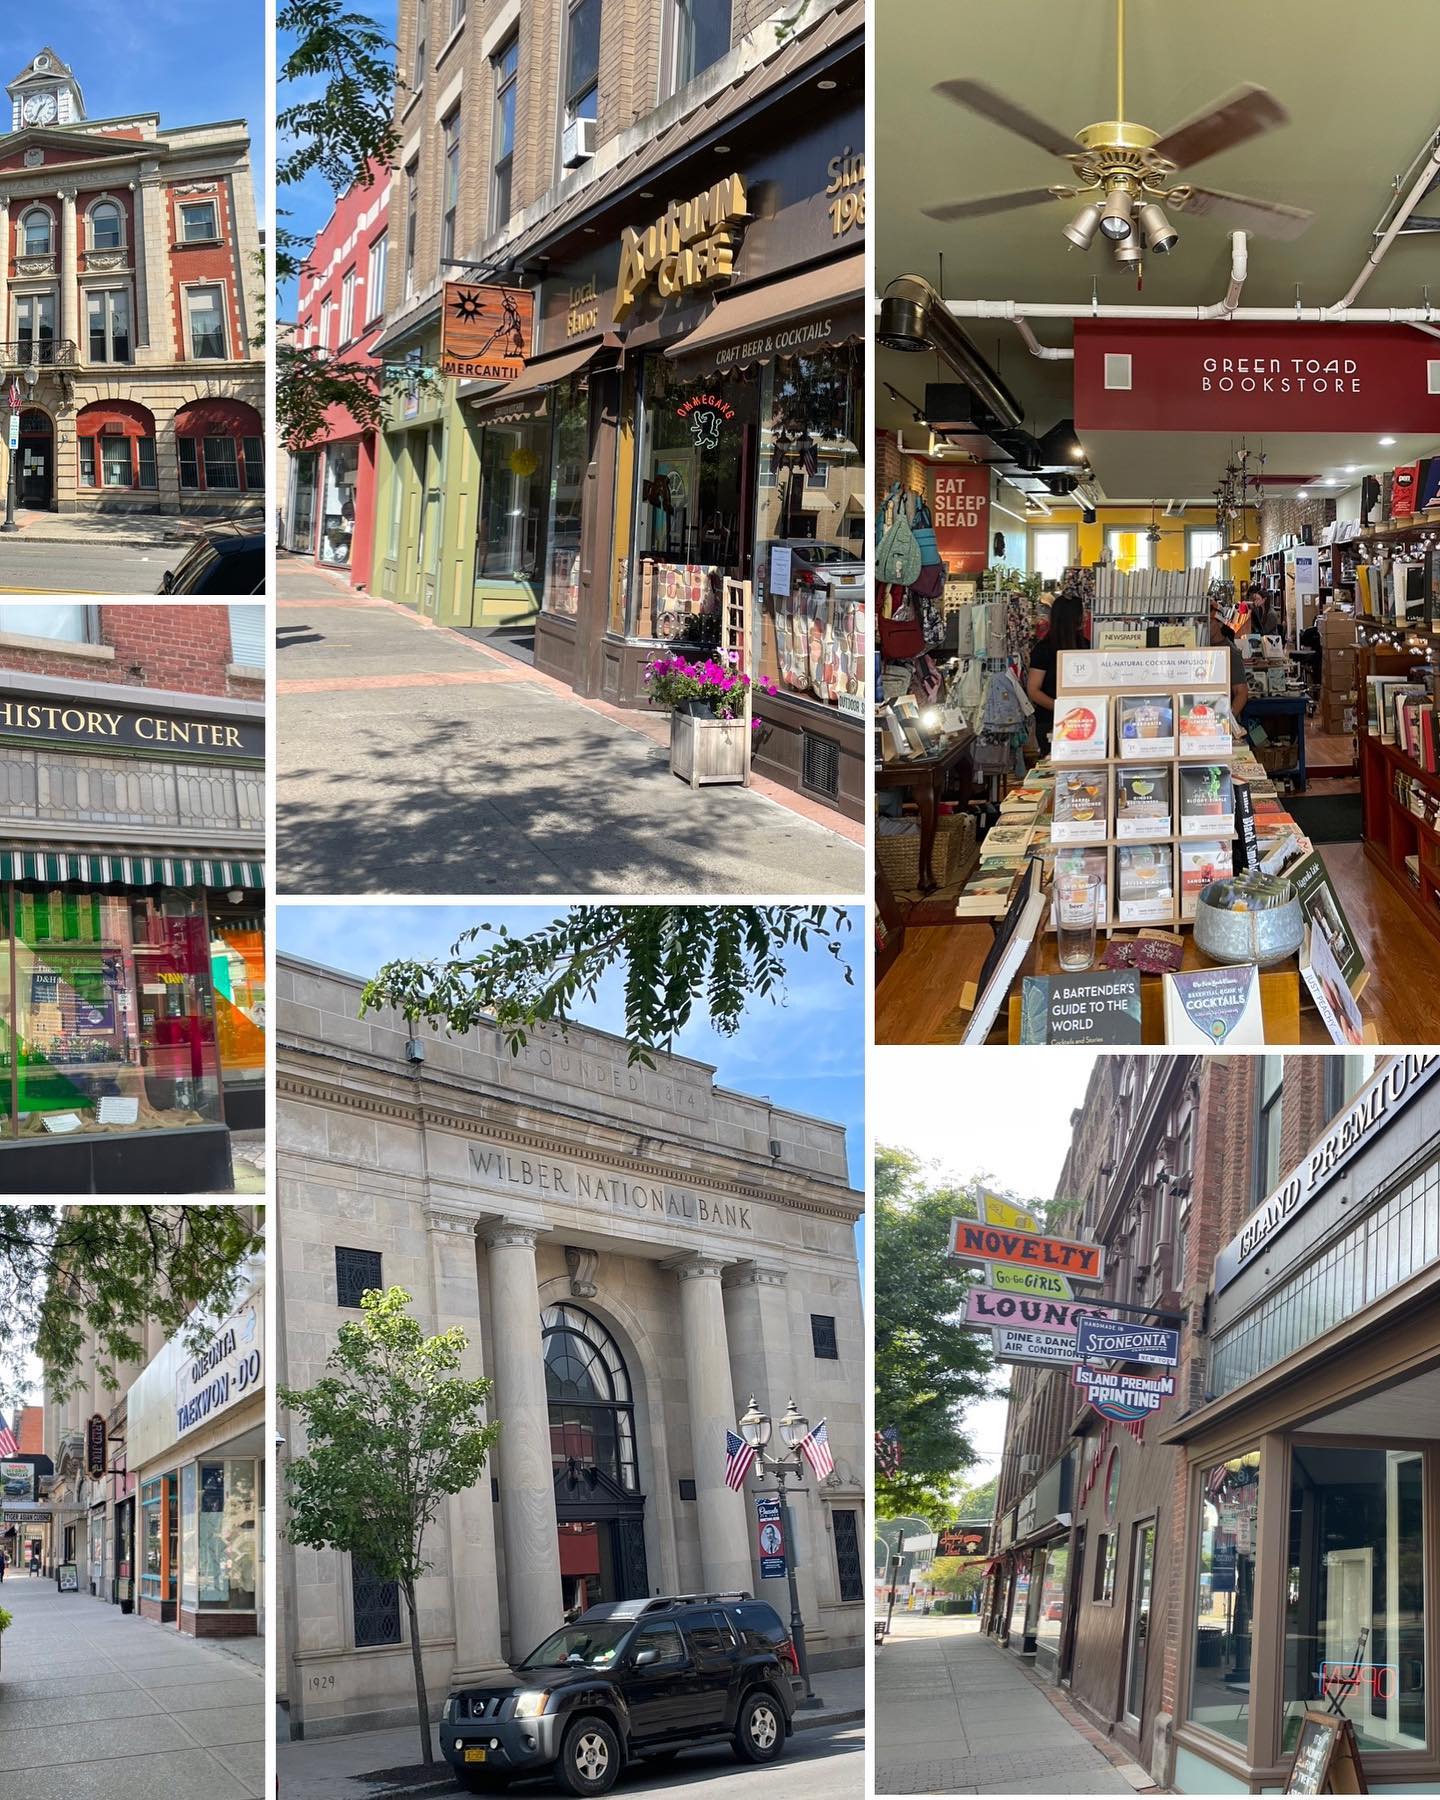 Beautiful, quirky, fun and historic — it’s Oneonta, NY!  The “City of the Hills” is the western gateway to the Catskills, located in the foothills along the banks of the Susquehanna River. Oneonta’s downtown is host to great shops, one of my favorite small bookstores - @thegreentoadbookstore - and a series of great restaurants and grills. Like nearby Cooperstown, Oneonta is a baseball town - home to the Oneonta Outlaws (New York Collegiate Baseball League) and is adjacent to the impressive Cooperstown Dreams Park, a large multi field baseball complex that focuses on youth baseball.  Oneonta is also home to two Colleges - SUNY Oneonta, dating back to 1889, and Hartwick which originated in Hartwick Seminary, founded 1797. #oneonta #oneontany #catskills#sunyoneonta #suny#hartwickcollege #happyupstate #iloveny #upstatenewyork